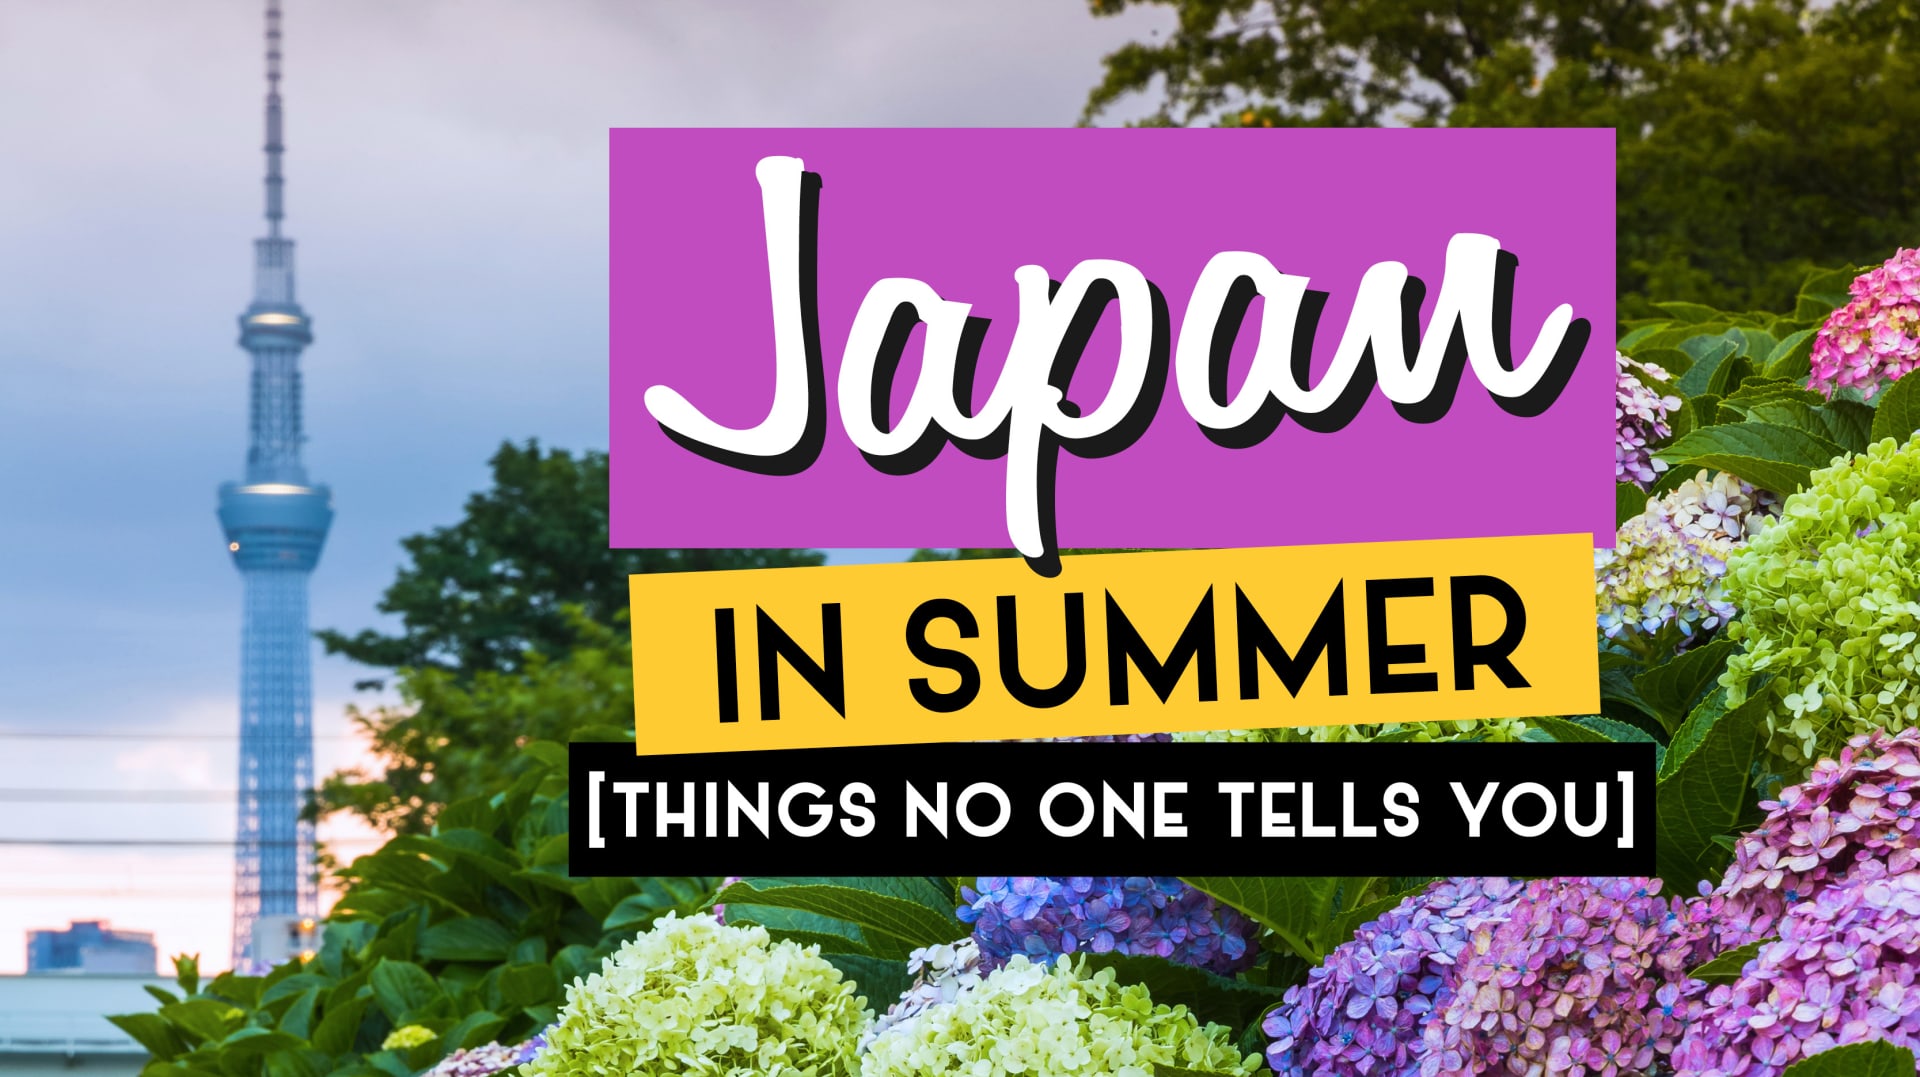 5 Japanese life hacks for beating the summer heat while stuck indoors